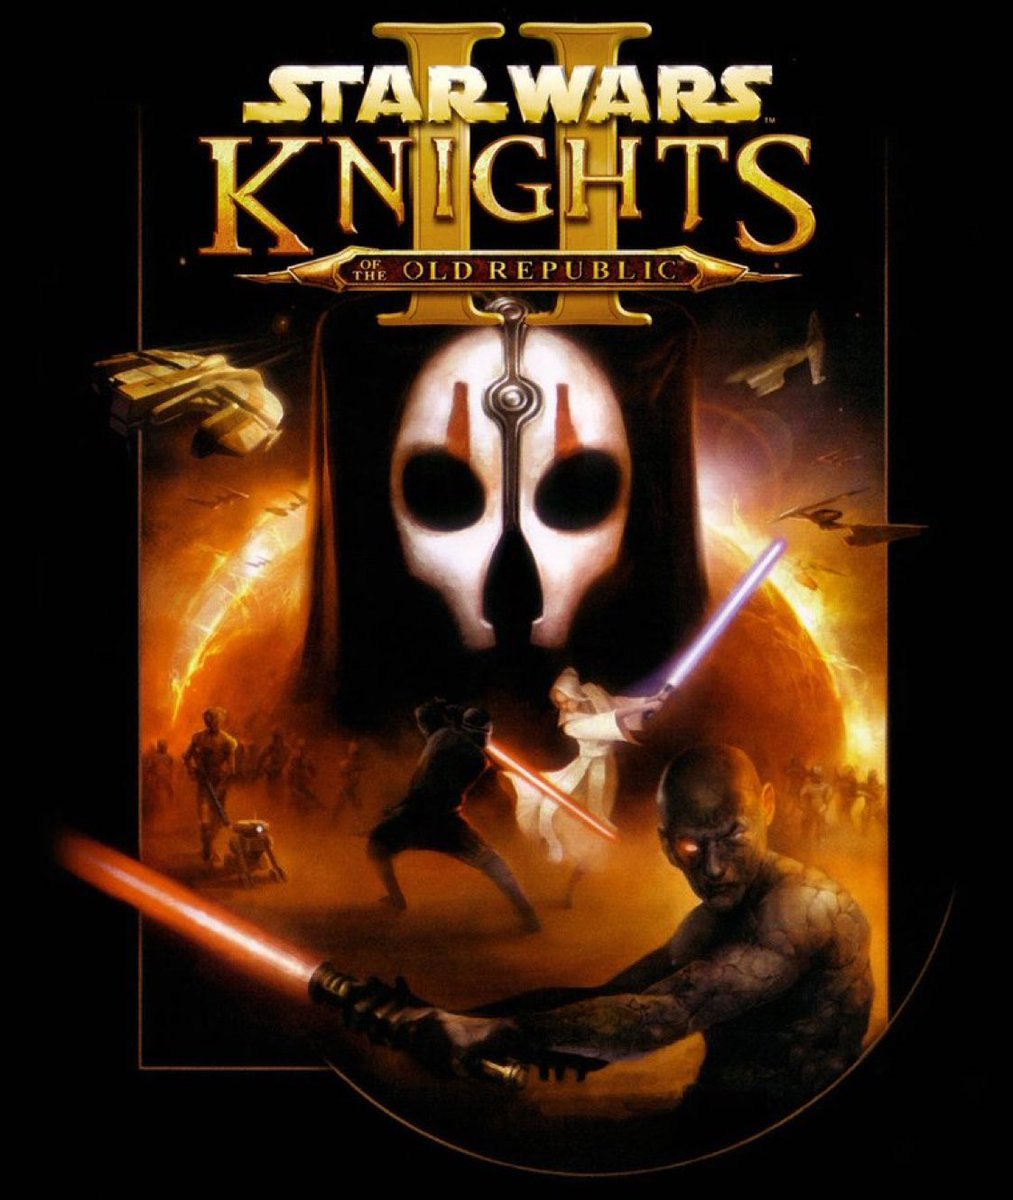 Star wars knight of the old republic 2 русификатор steam фото 19